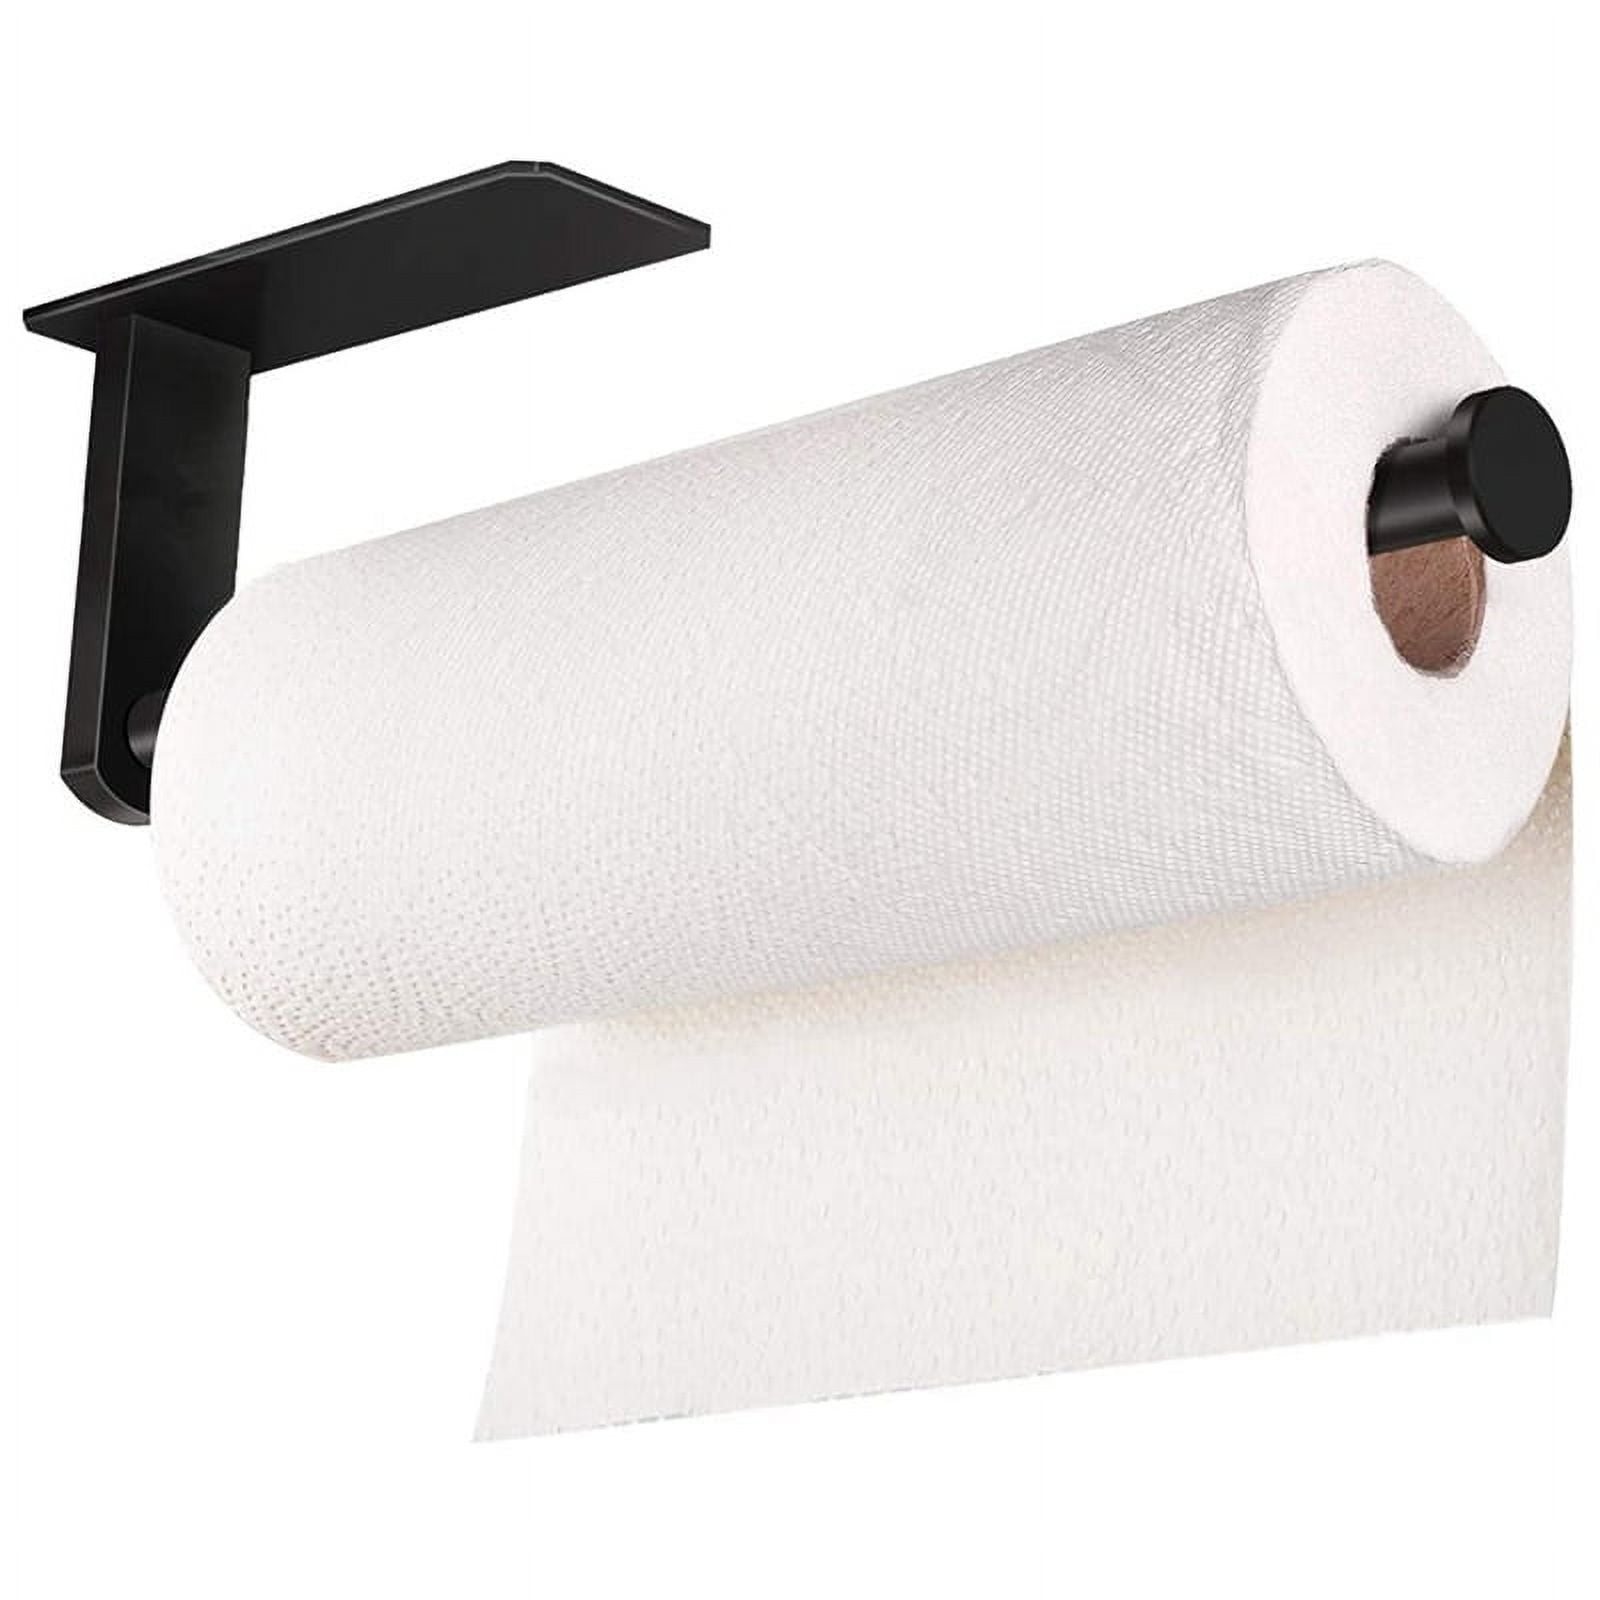 High Quality Adhesive Wall Mount Stainless Steel Paper Towel Roll Holder  Under Cabinet Paper Towels Holder - China Kitchen Paper Holder, Paper Holder